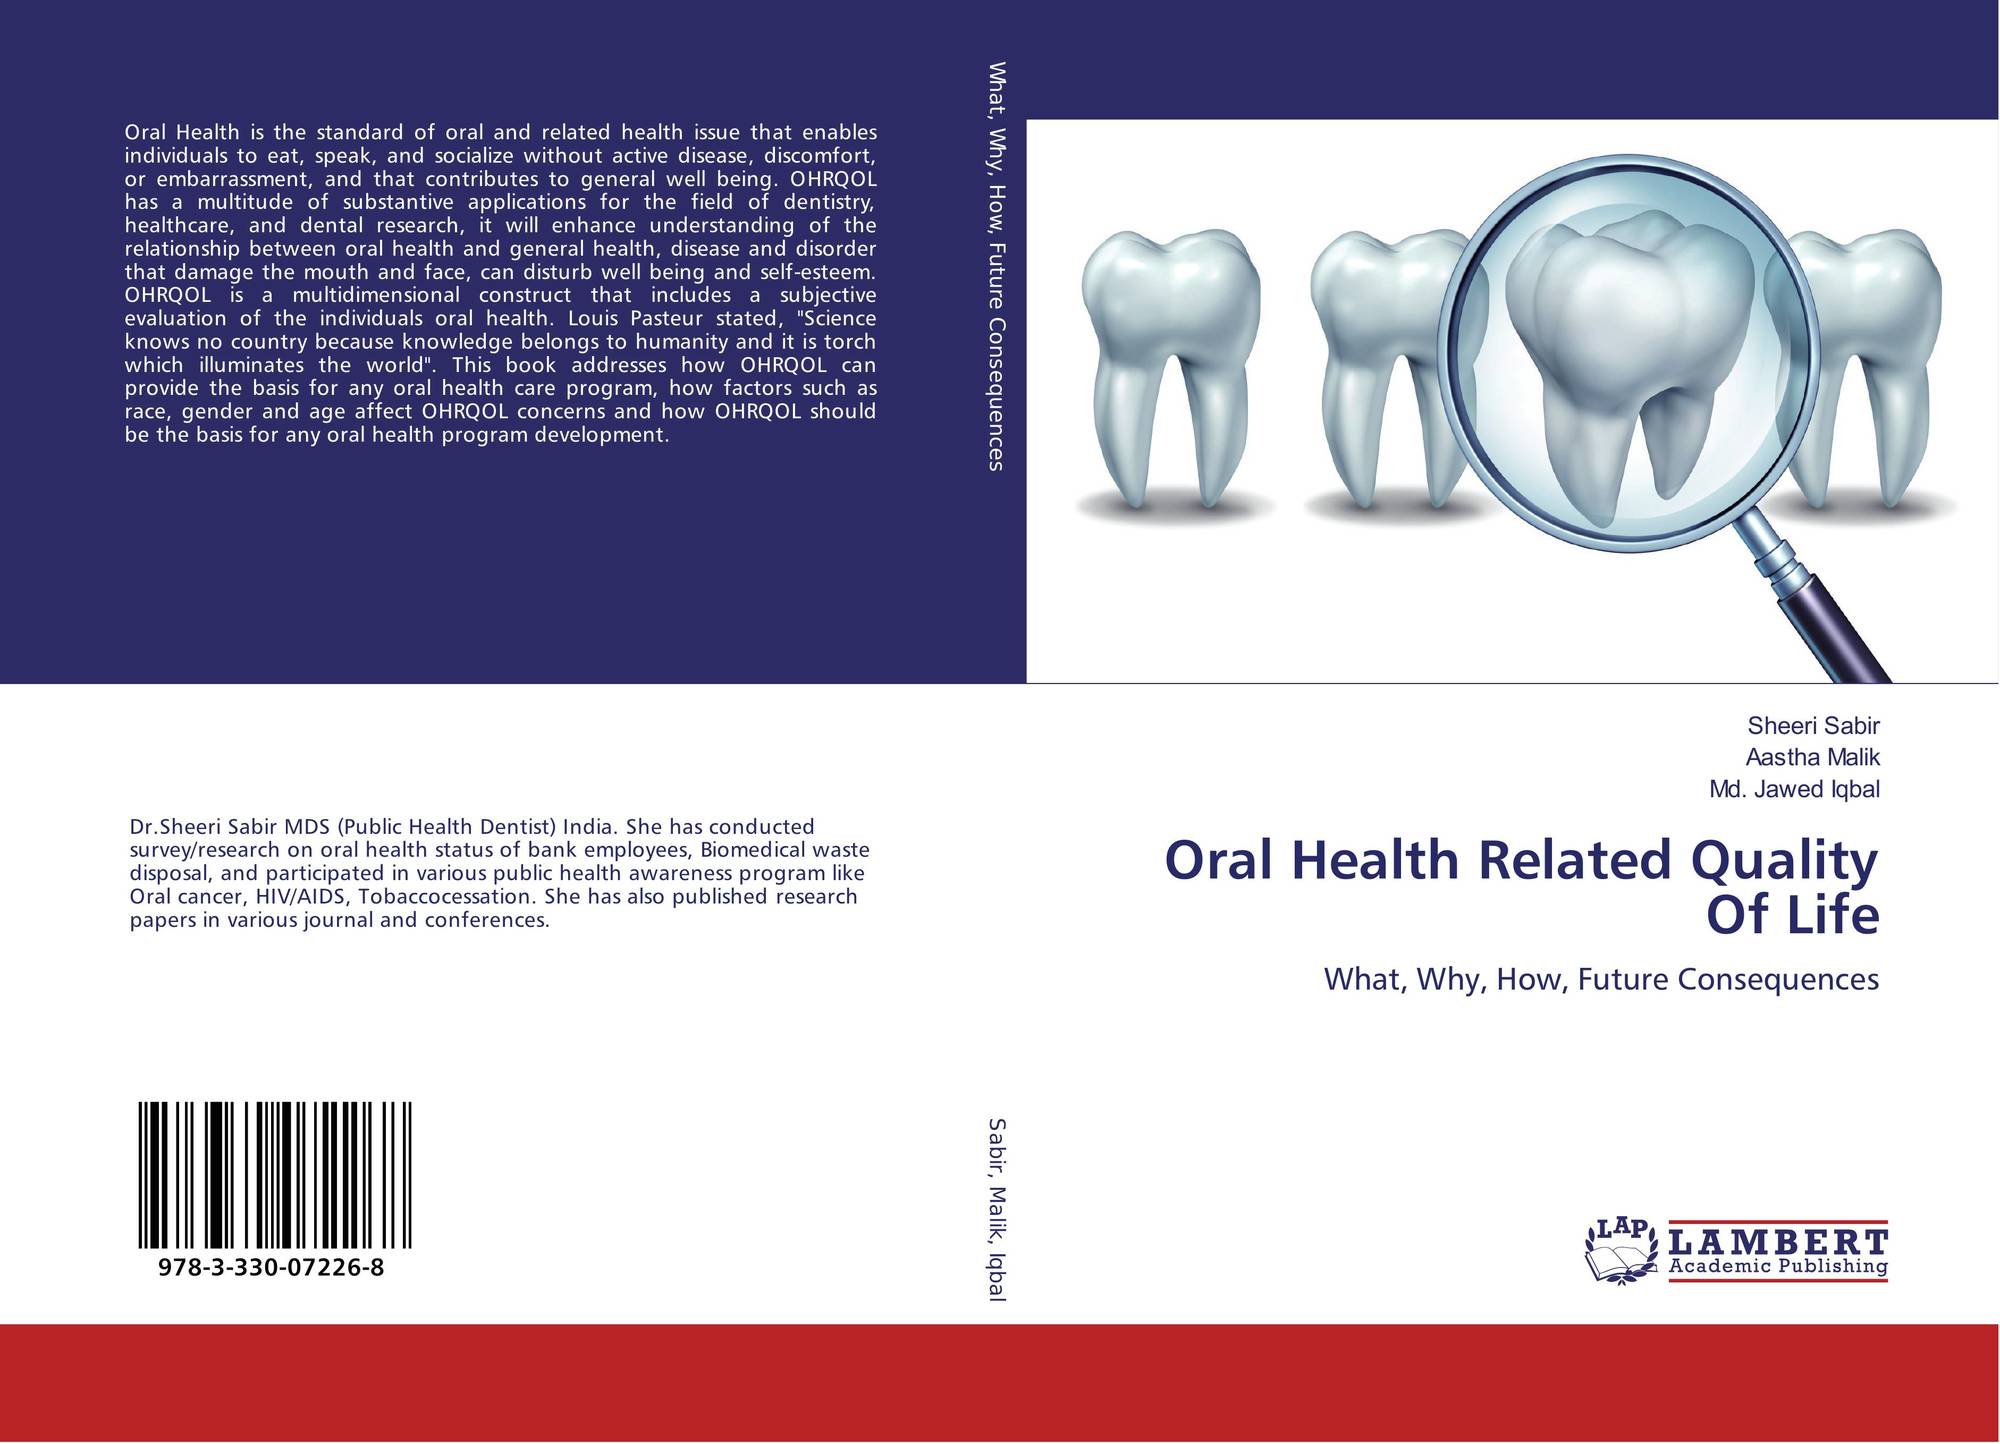 Oral Health Quality Of Life 56